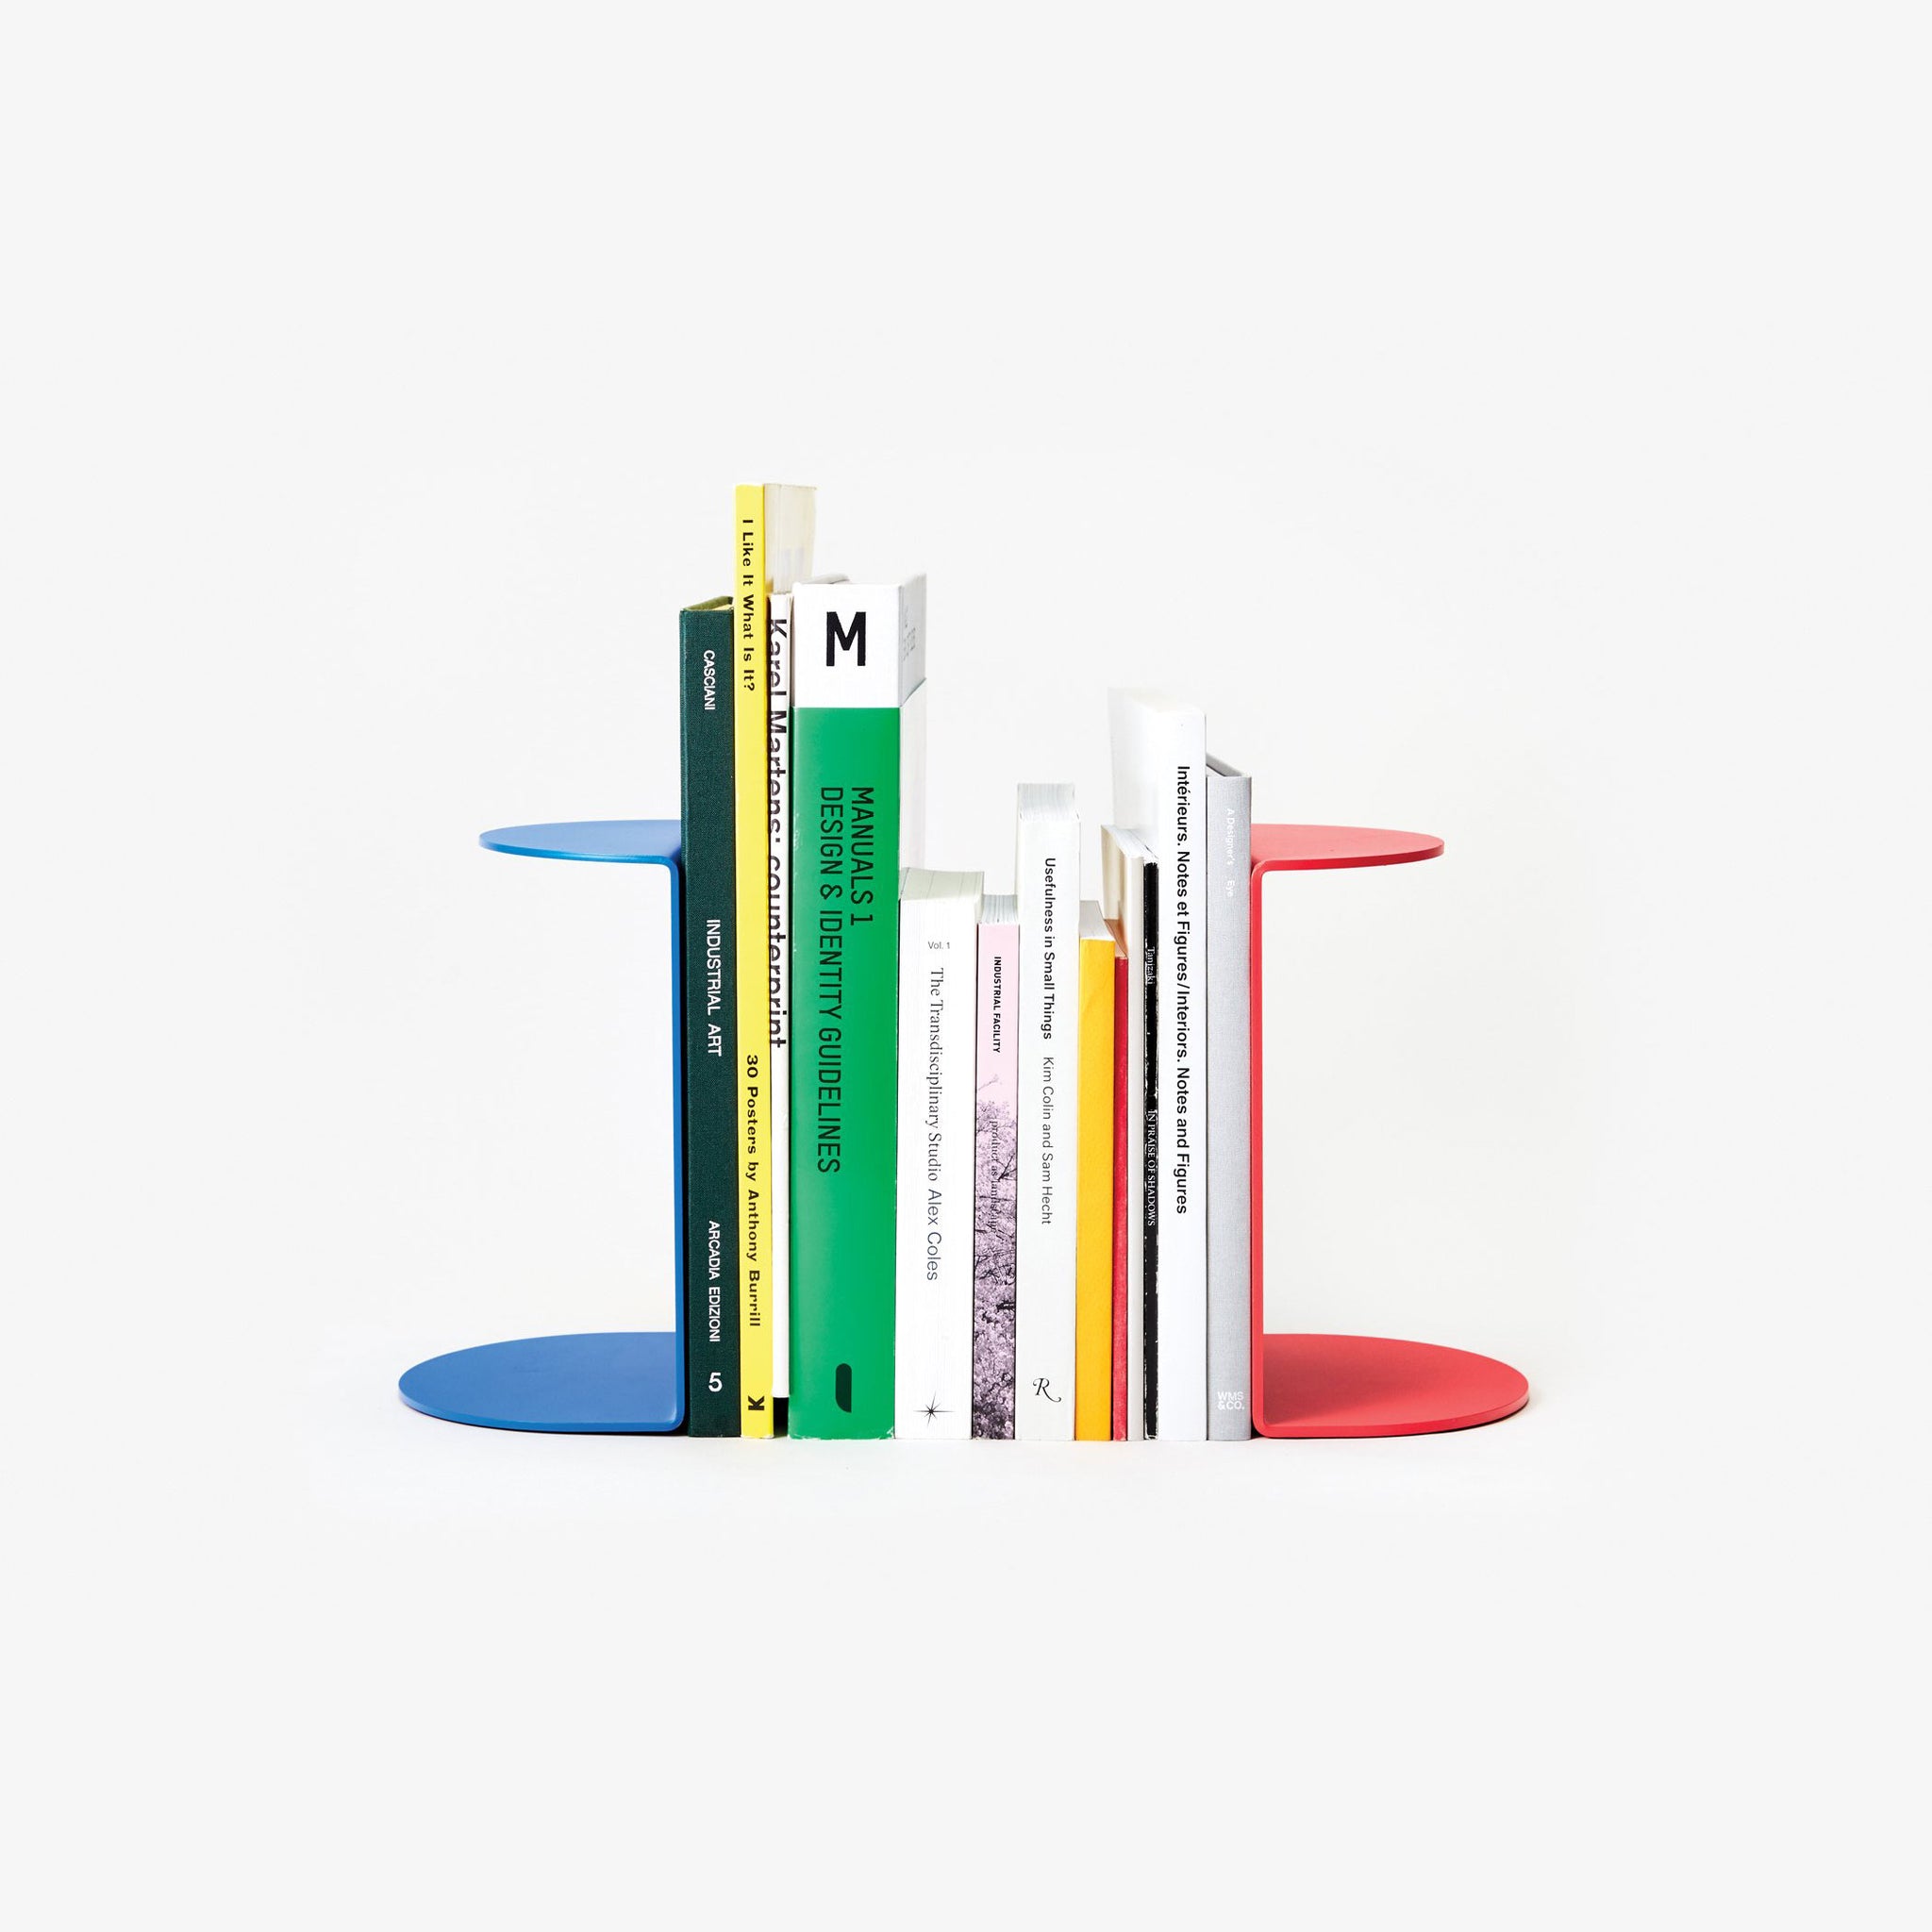 Areaware Reference Bookend